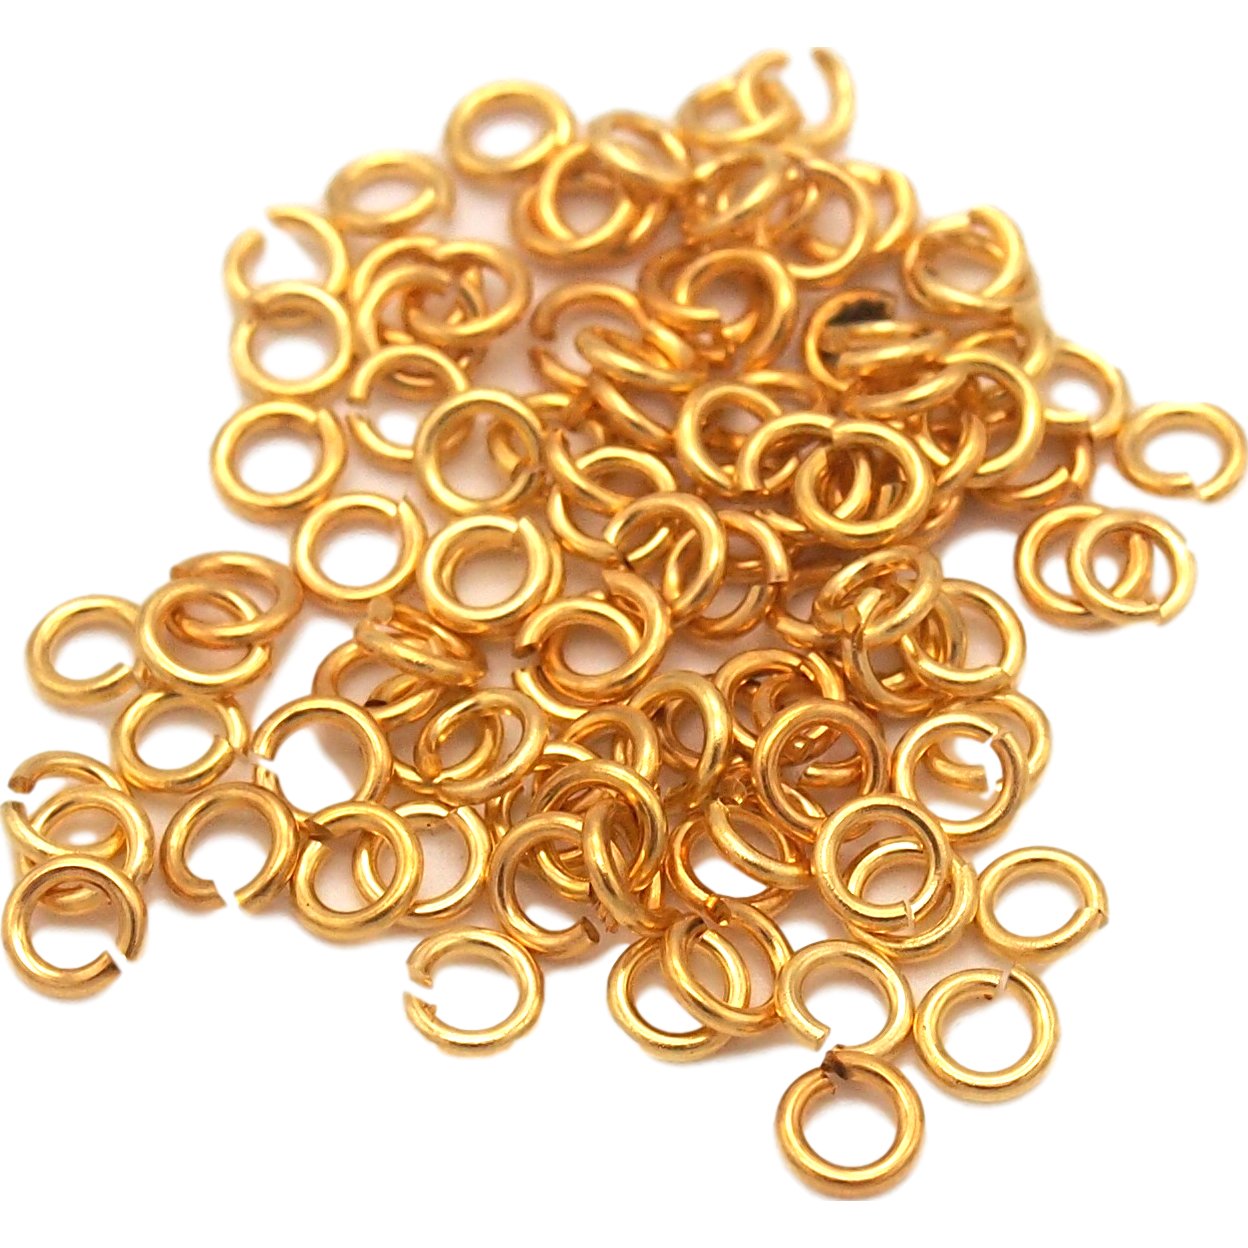 4mm 20 Gauge Open Jump Rings 22K Gold Plated (100)